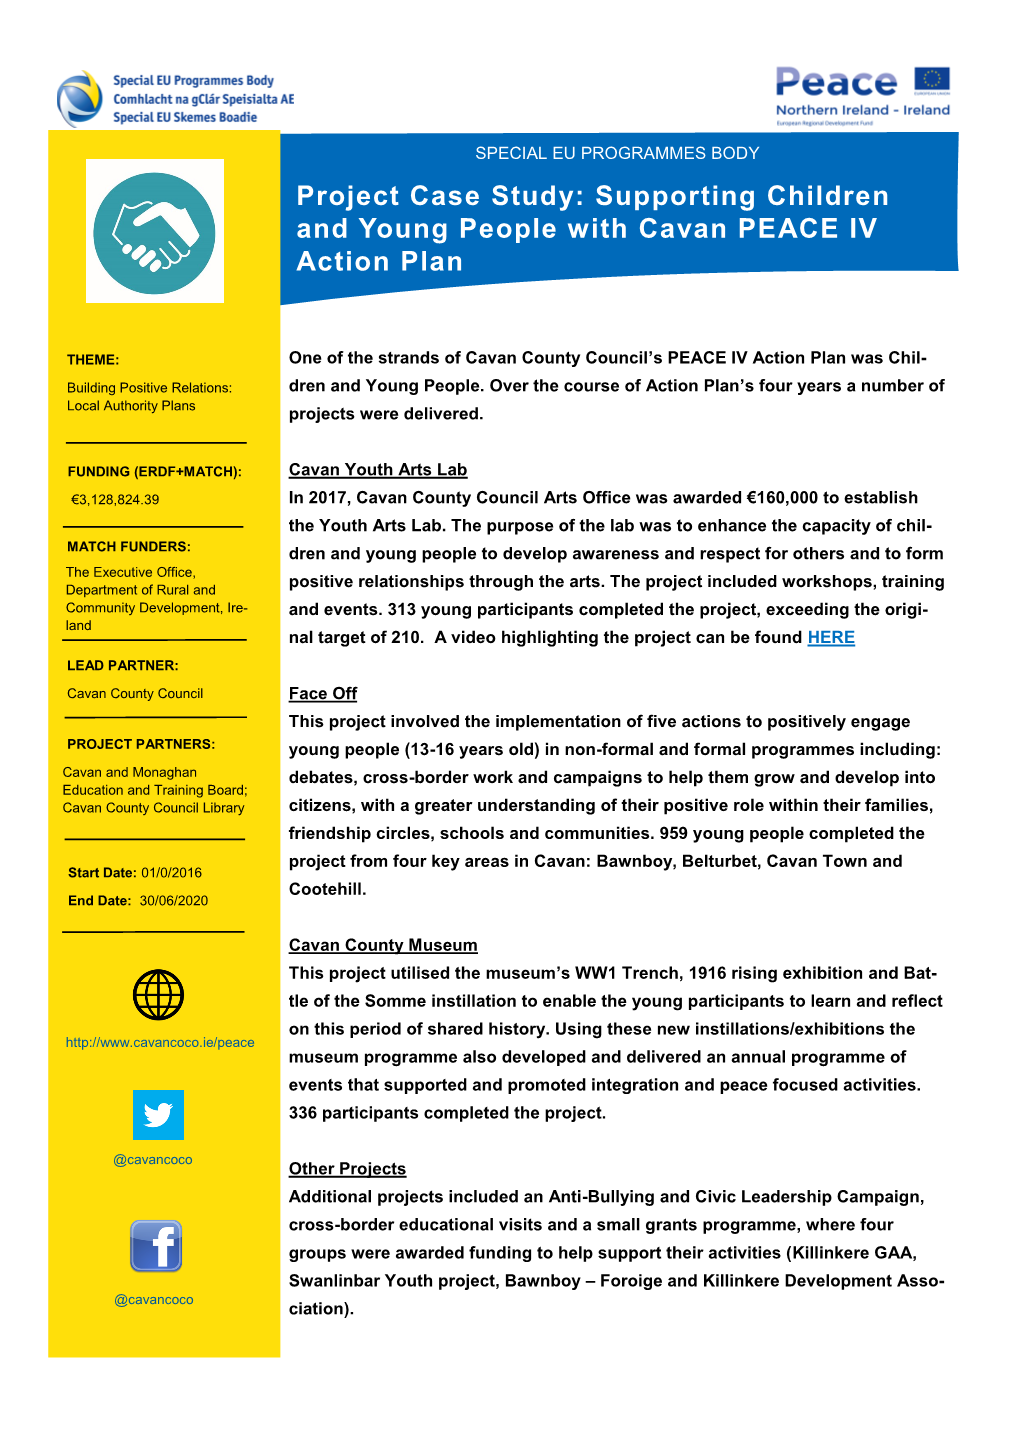 Supporting Children and Young People with Cavan PEACE IV Action Plan